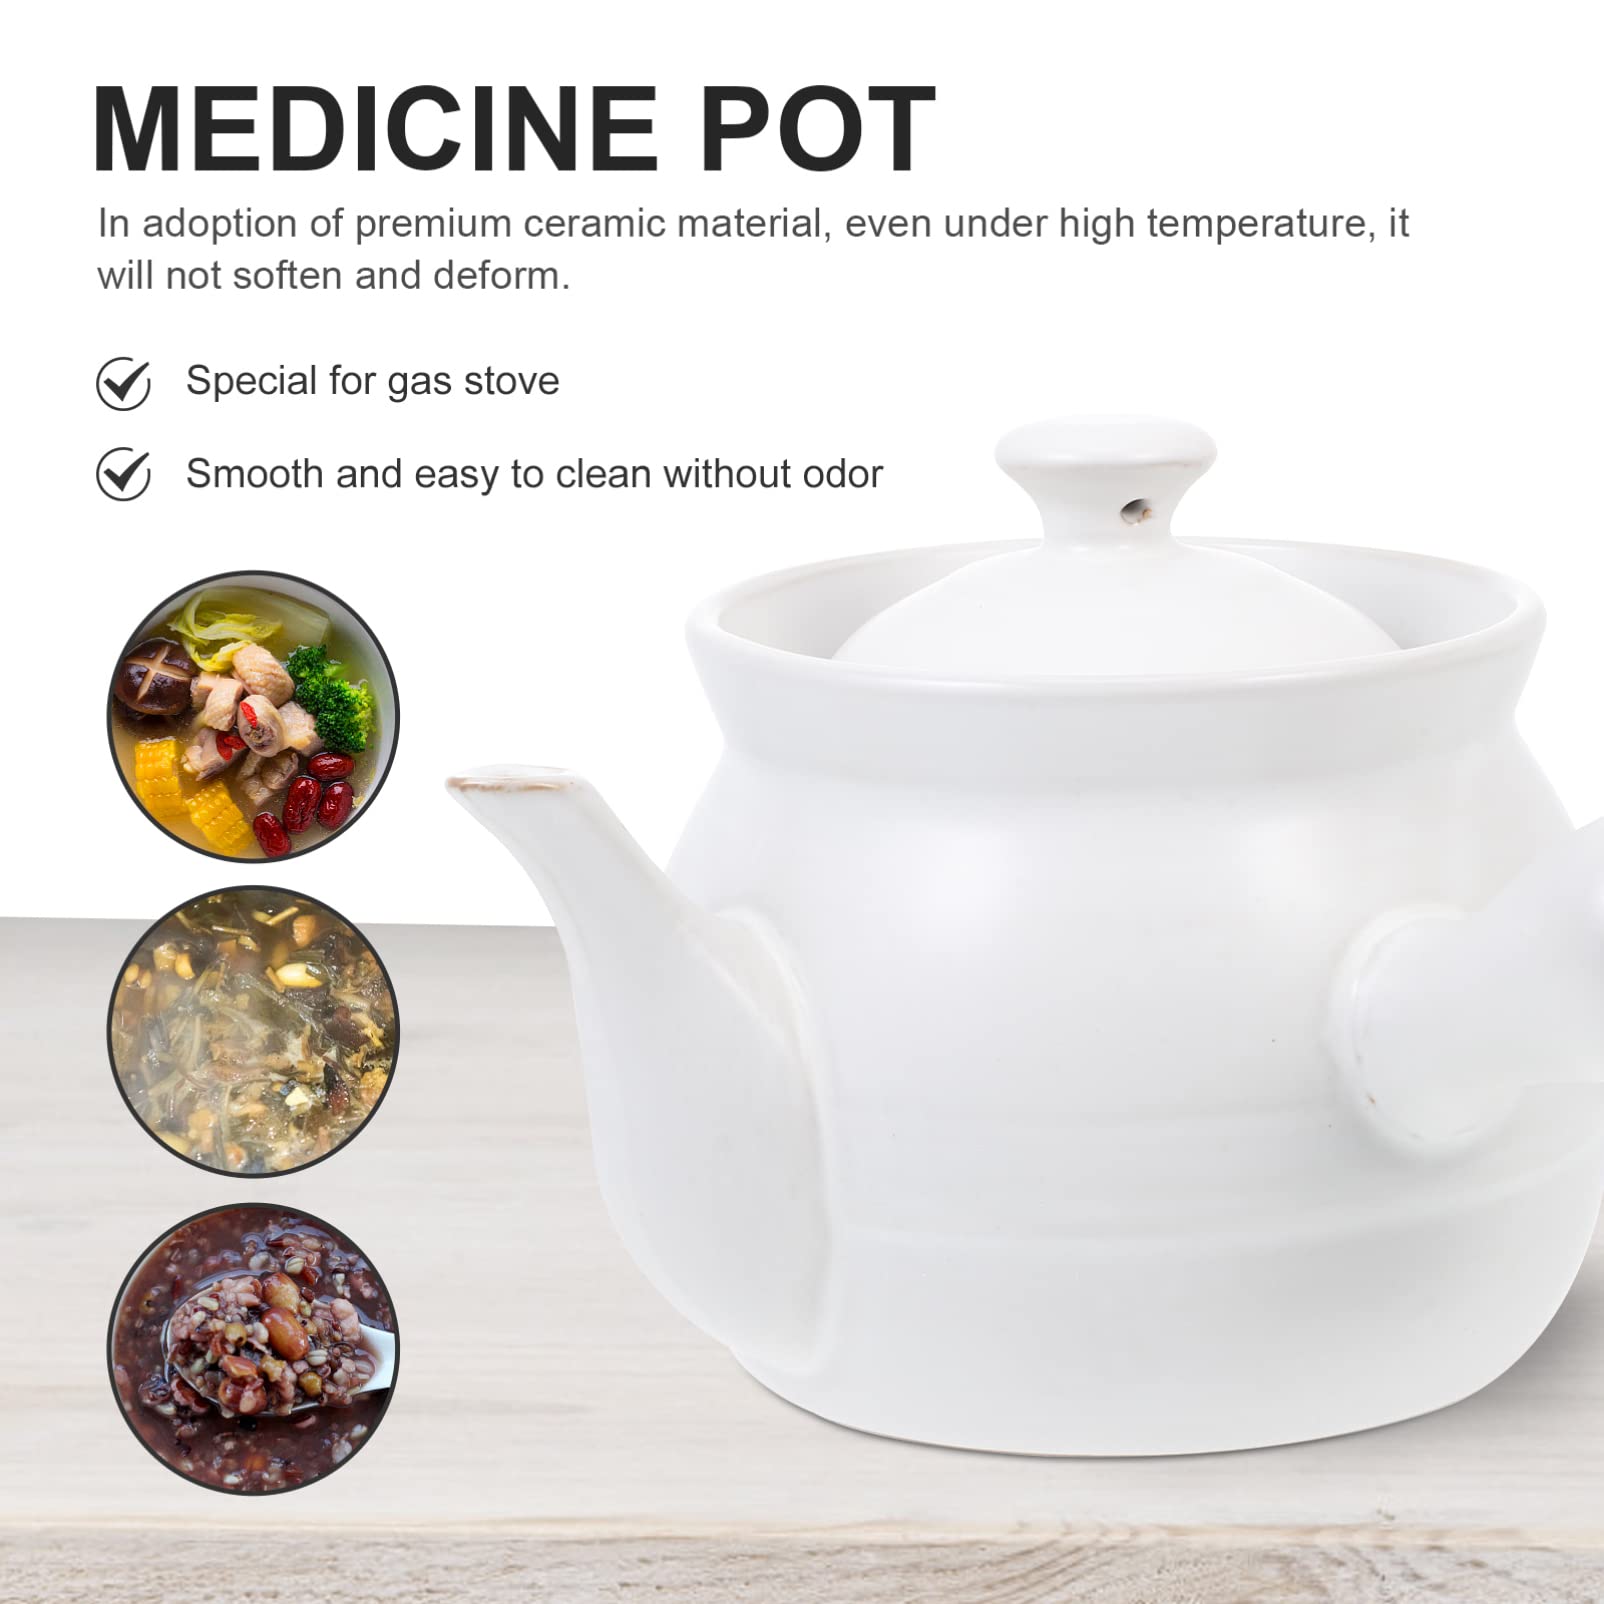 DOITOOL Ceramic Medicine Pot Traditional Chinese Medicine Cooker Health Decoction Pot Clay Tea Cooking Pot Coffee Kettles for Chinese Herb Medicine Soup 2. 6L White